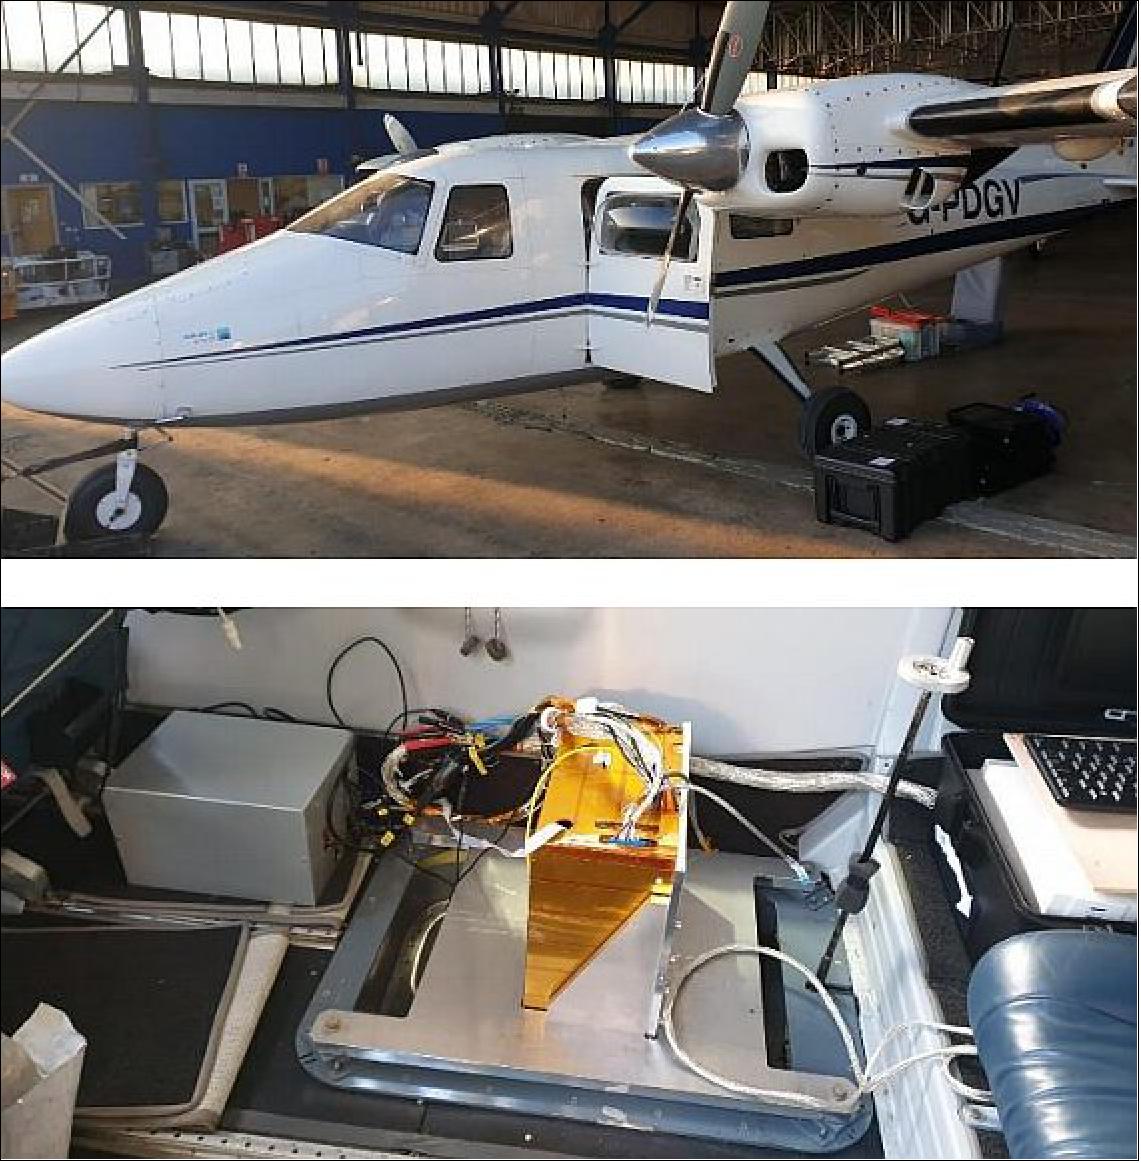 Figure 15: PDG Aviation Vulcanair P68 (top), EM Camera installed in the aircraft (bottom), image credit: SSTL